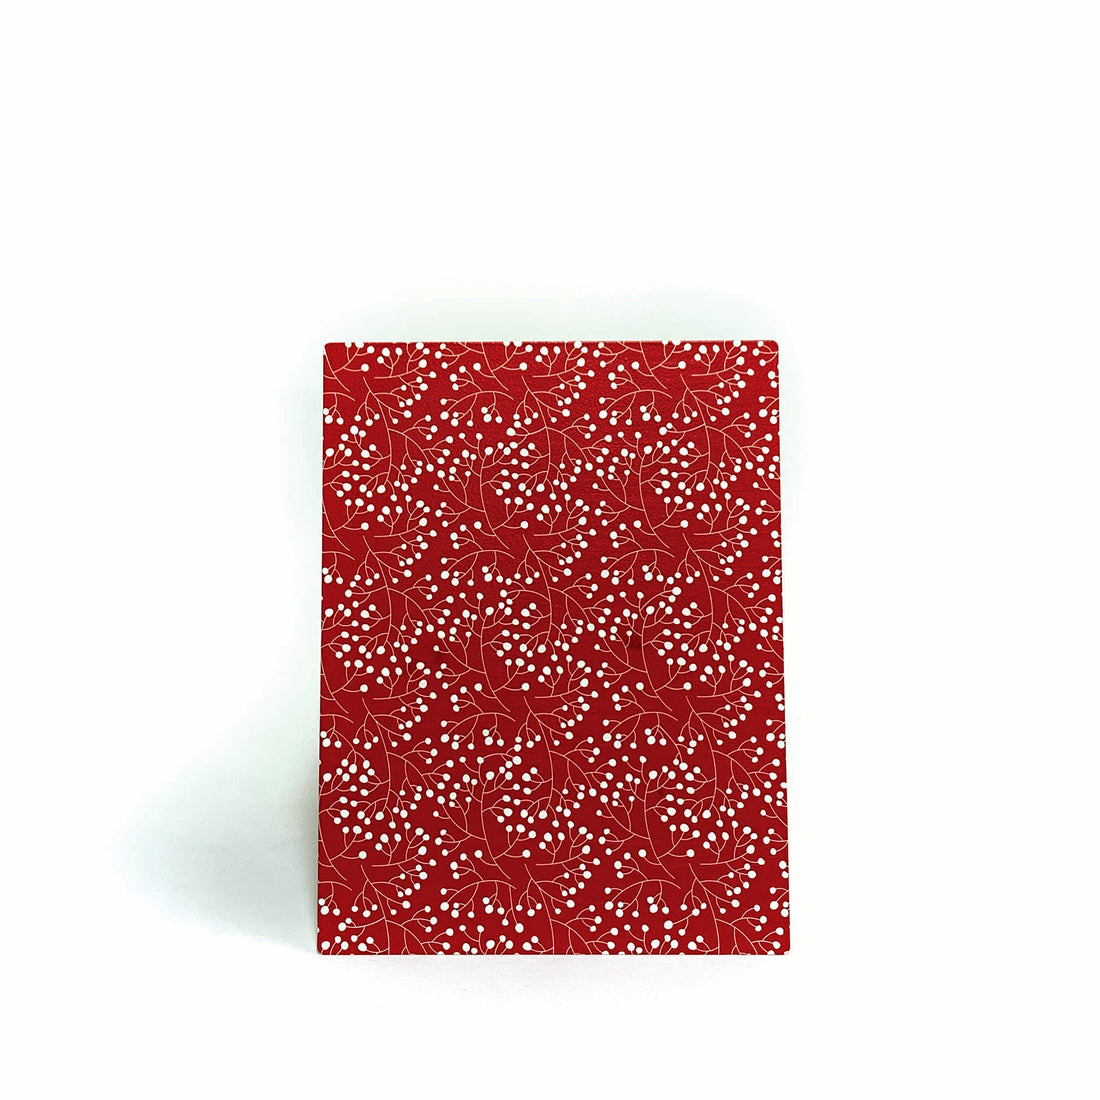 Easel w/ Kickstand 8.5x6.5 Red/White Berries Pattern